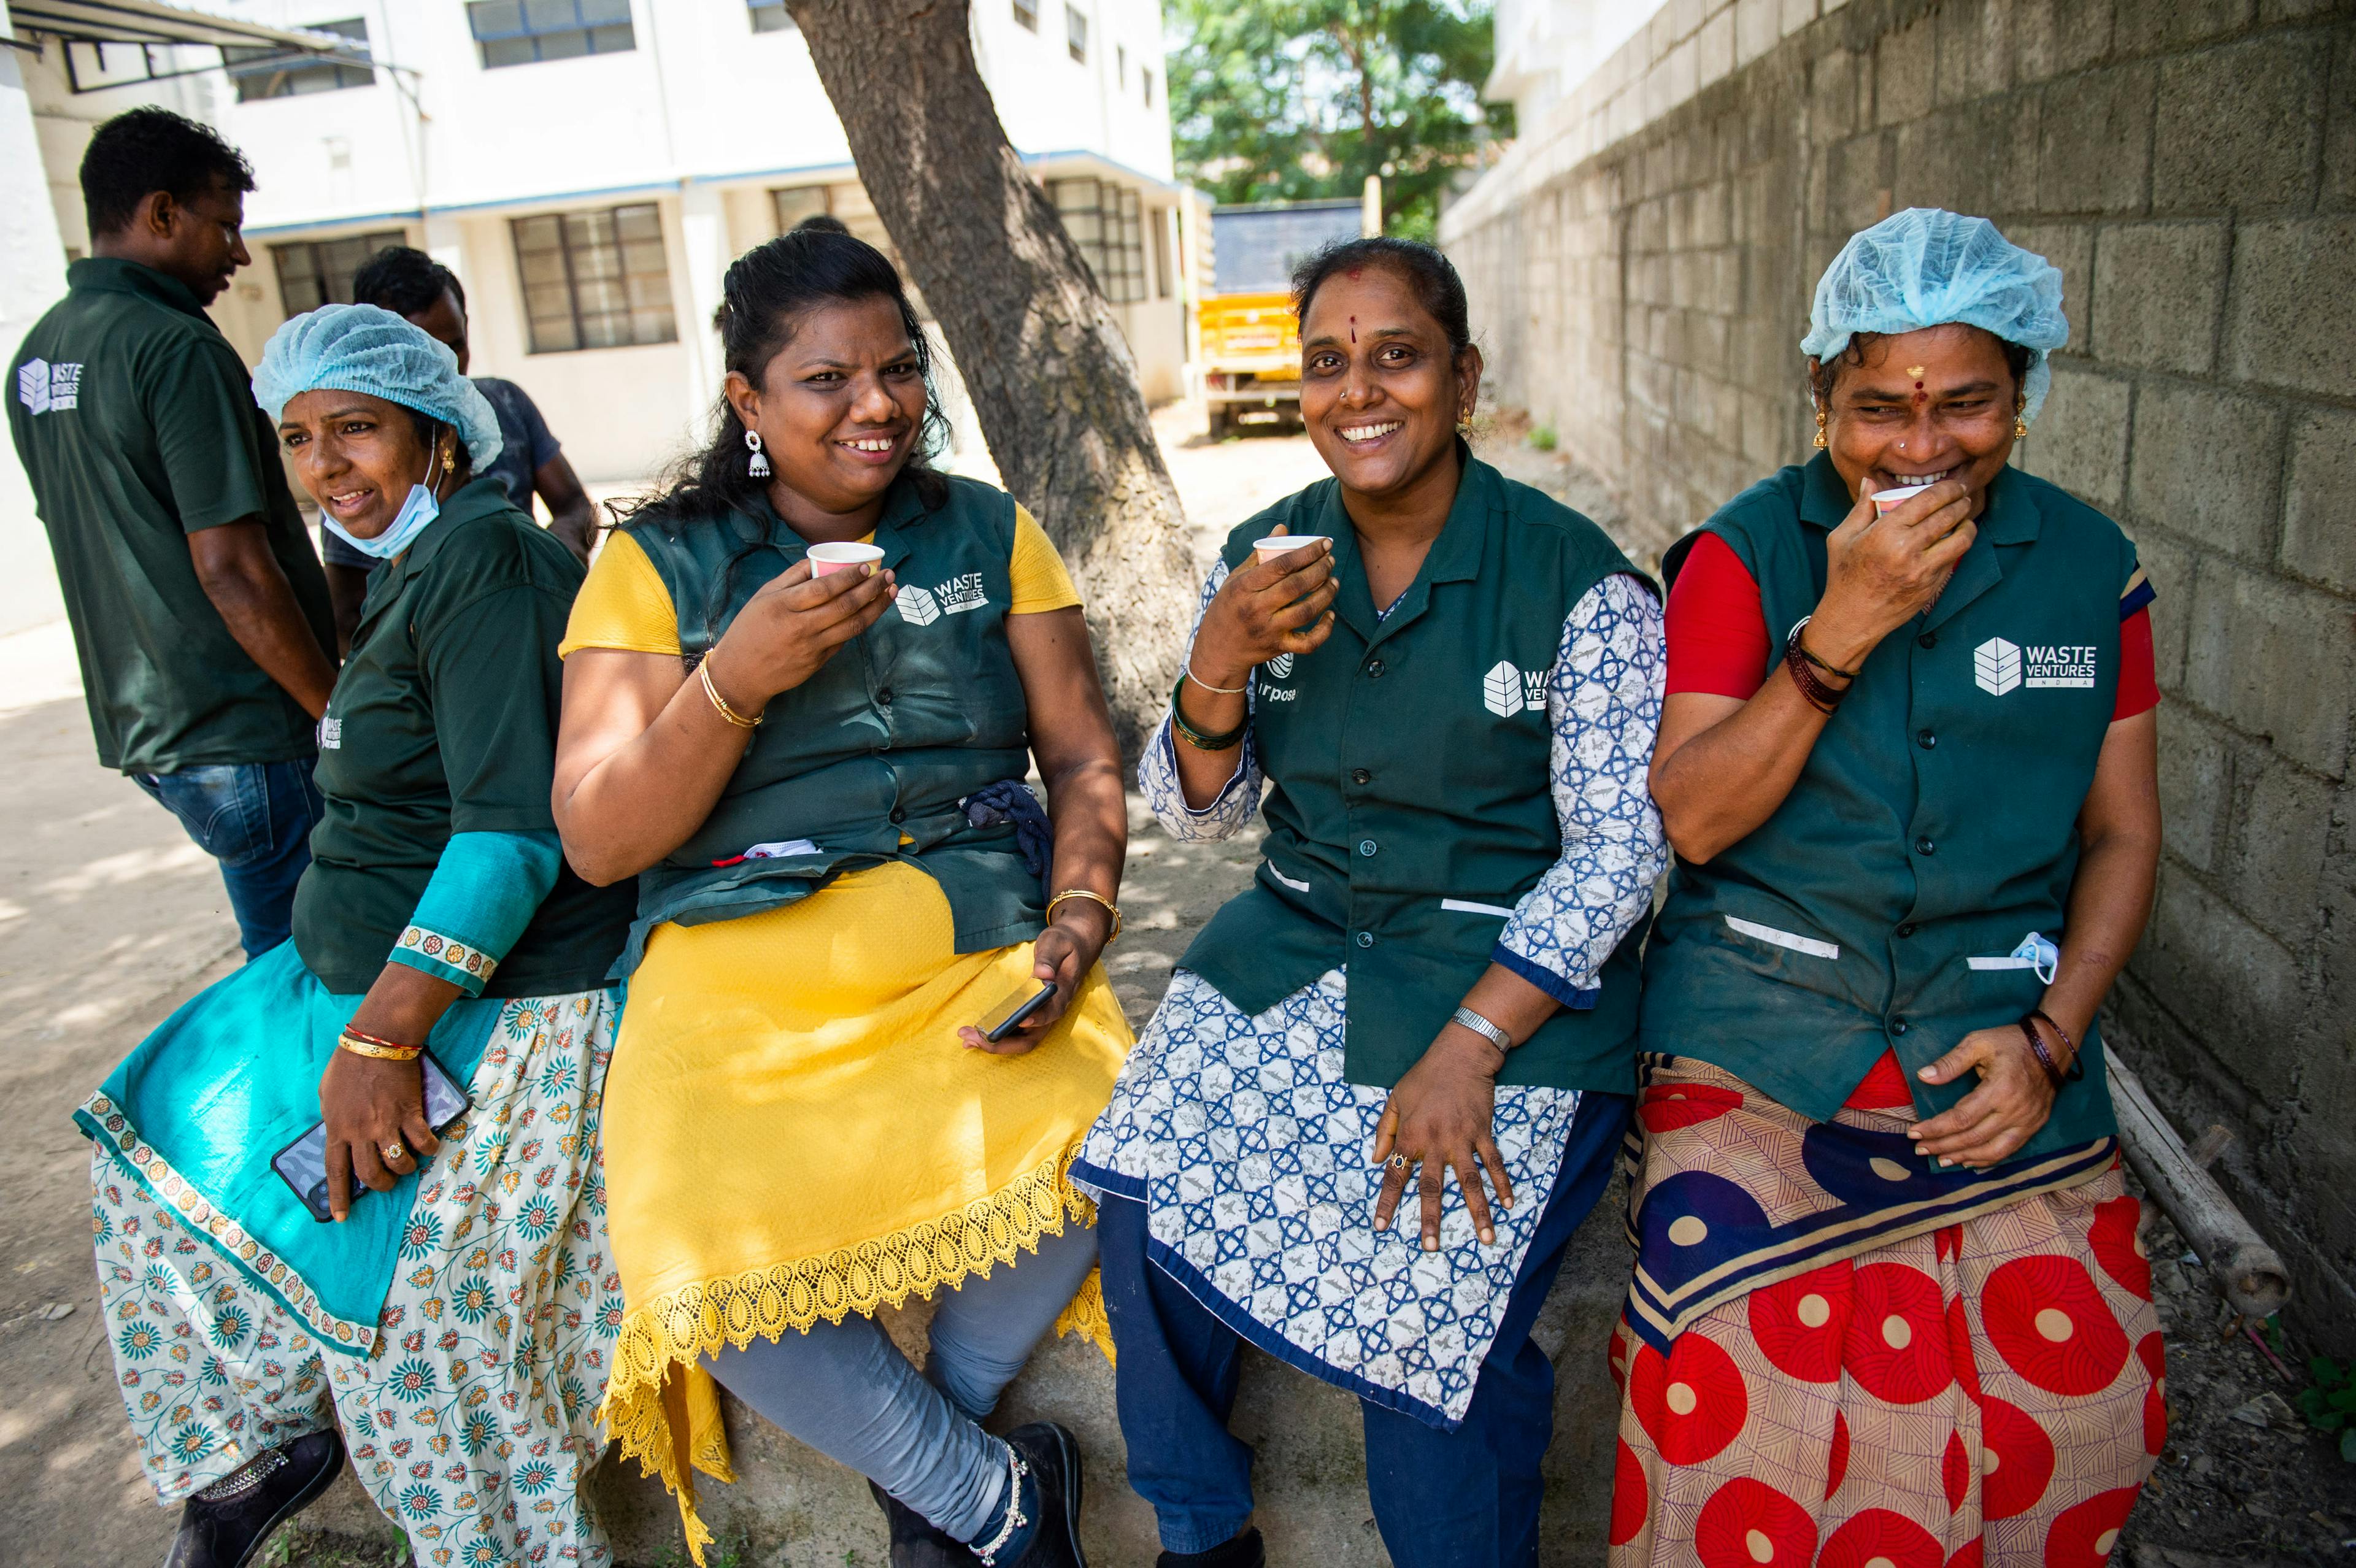 Four women sitting on break outside under shade, each wearing a green vest. They are smiling as they drink from a paper cup.